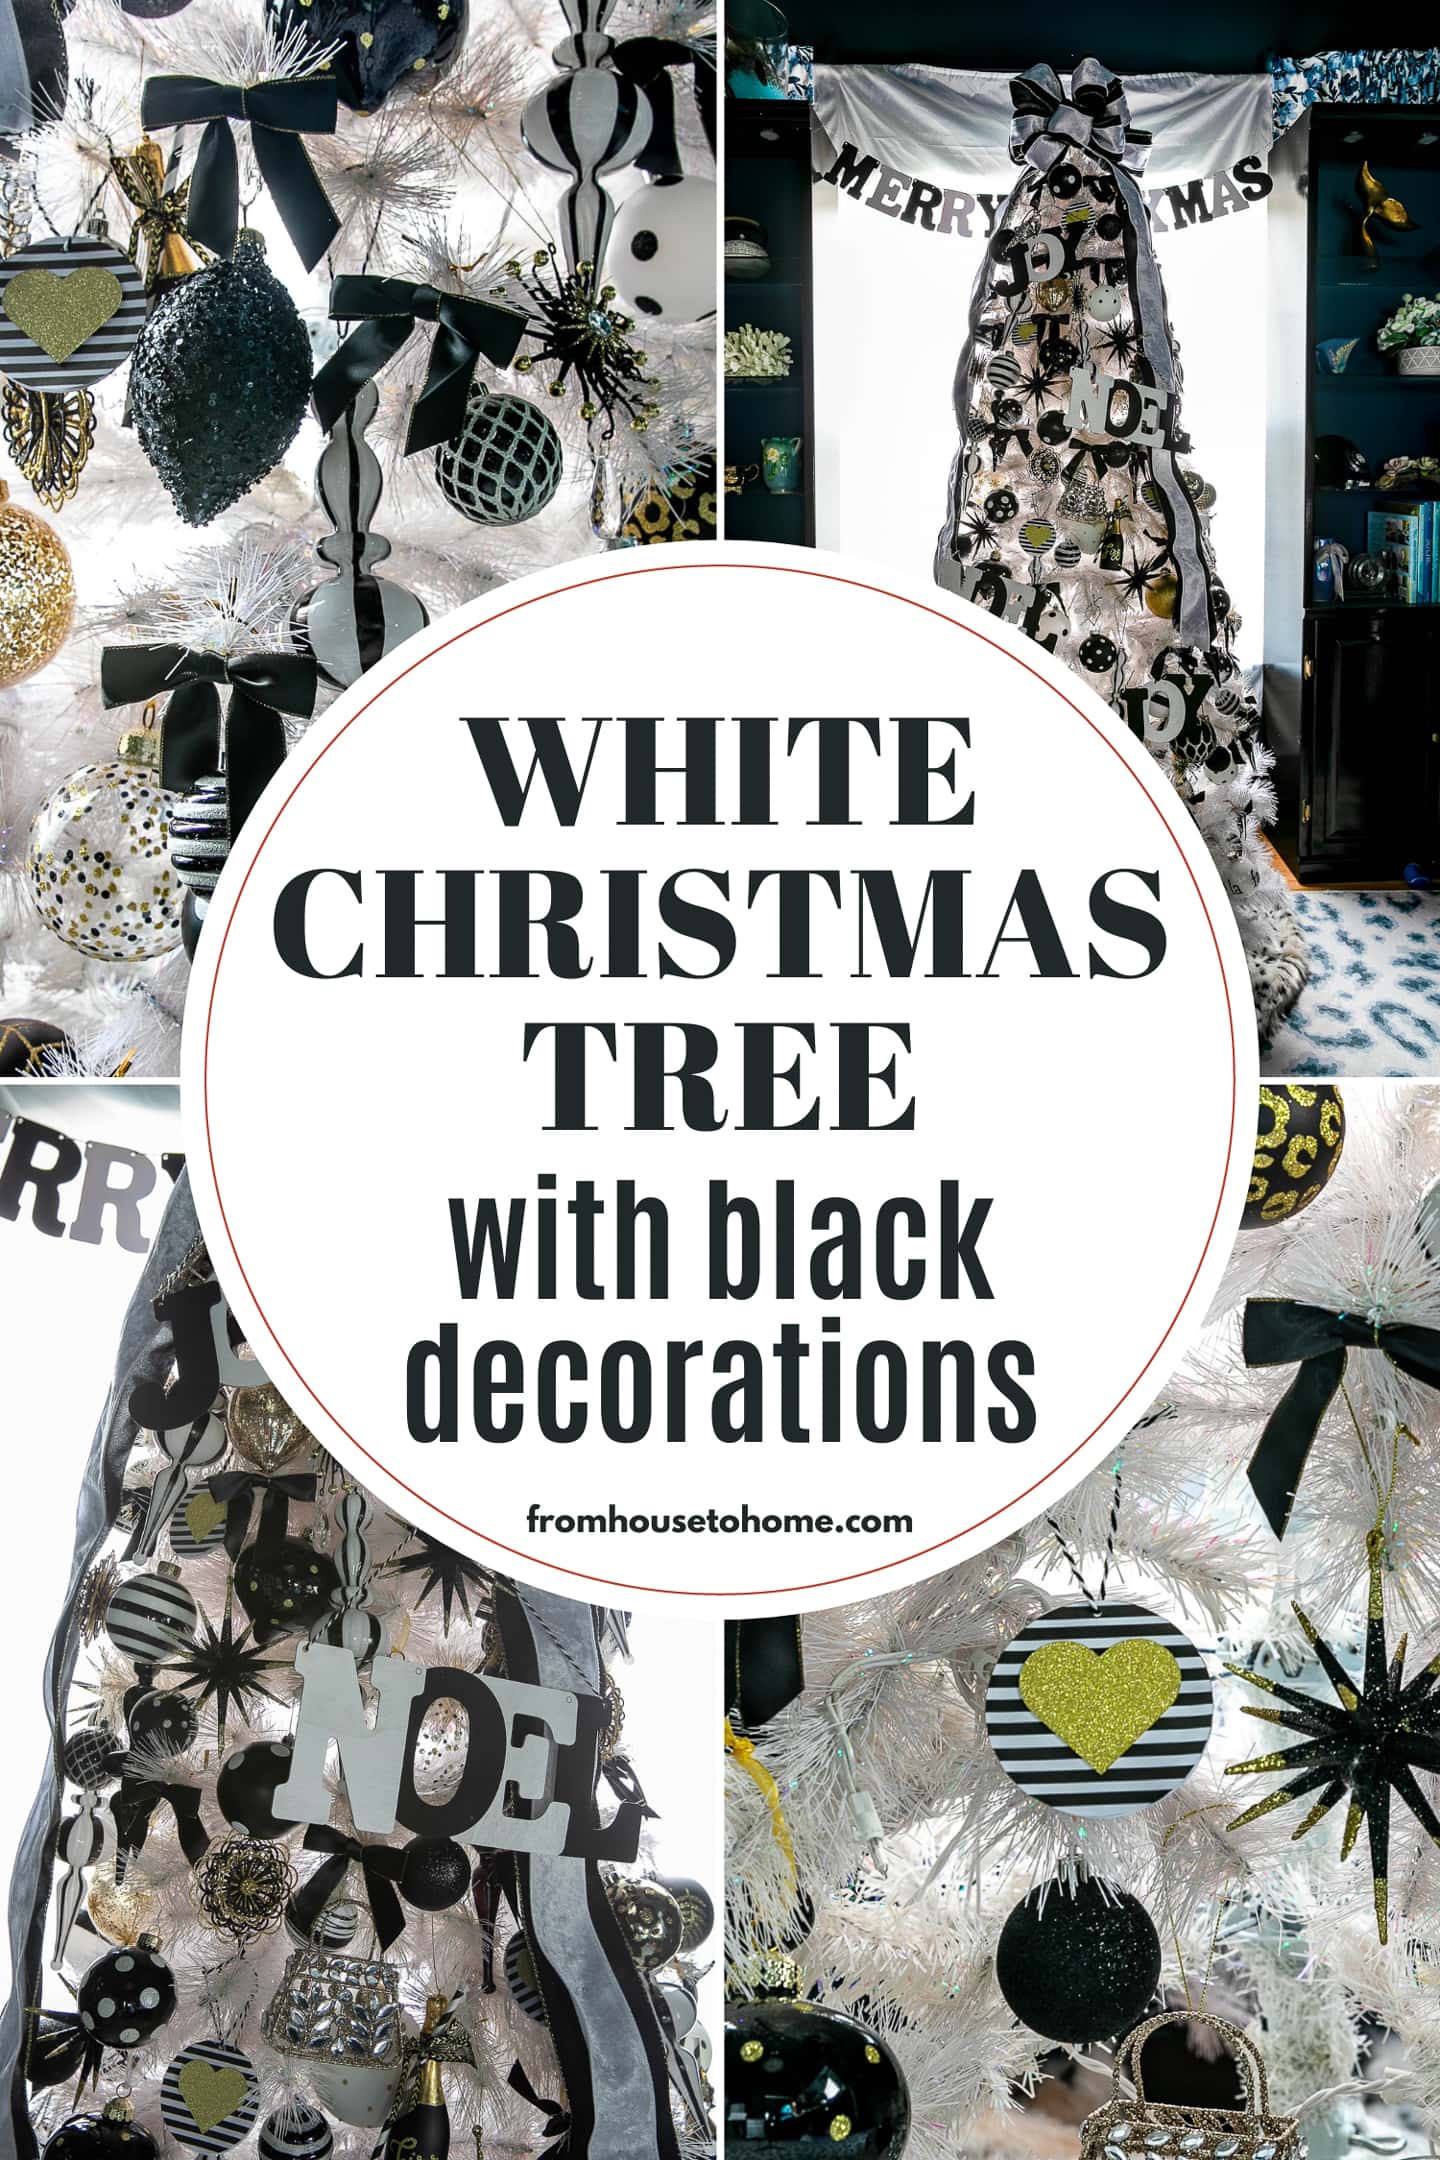 A stunning white Christmas tree decorated with elegant black decorations.